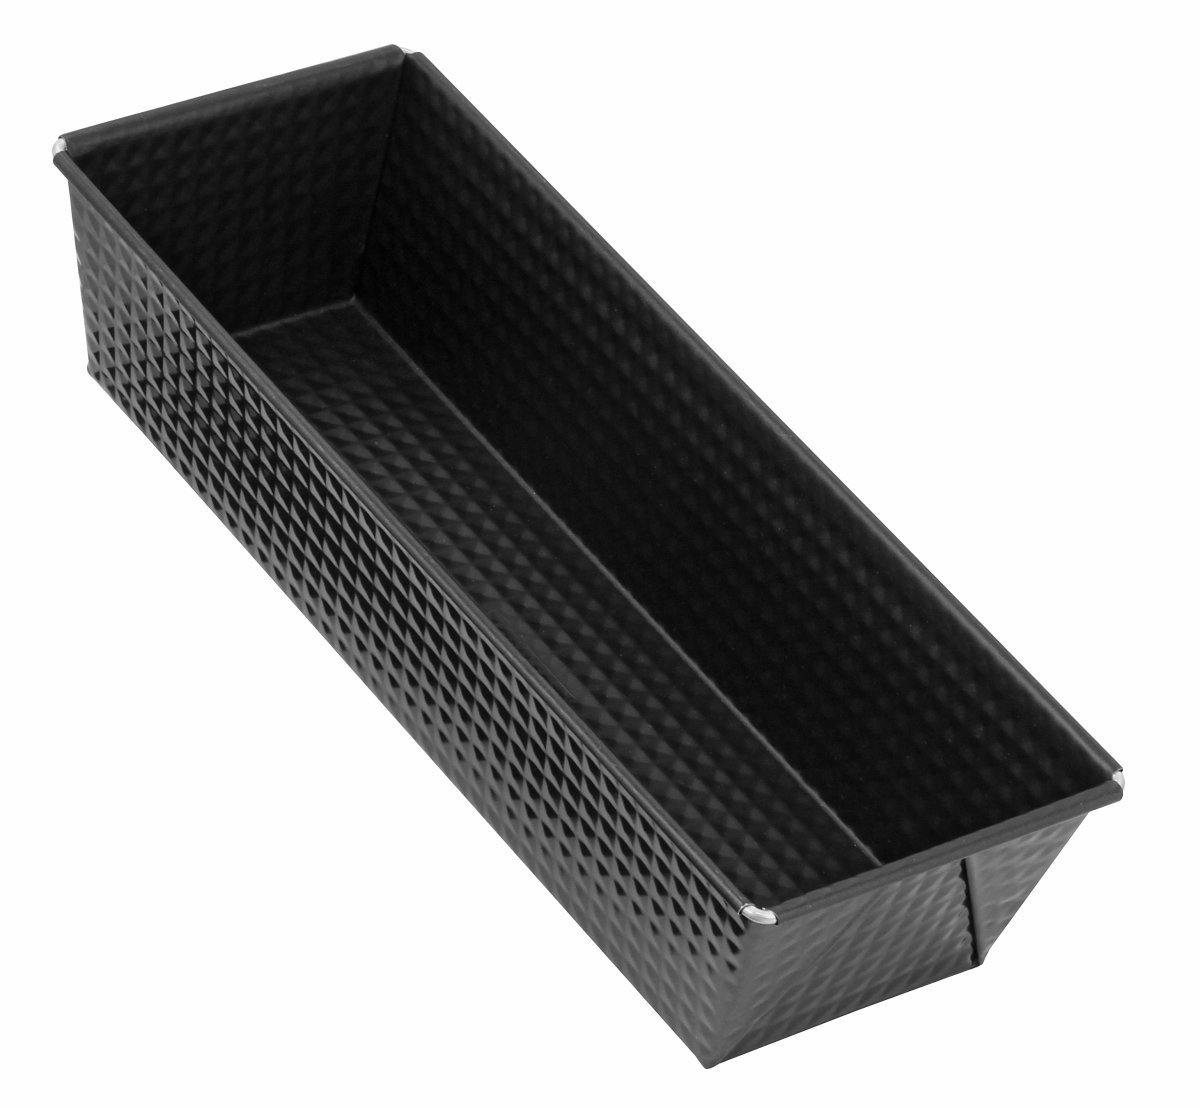 Zenker  "Black/Metallic" Loaf-Tin, Stainless Steel, 30.5X11.5X7 cm - Whole and All